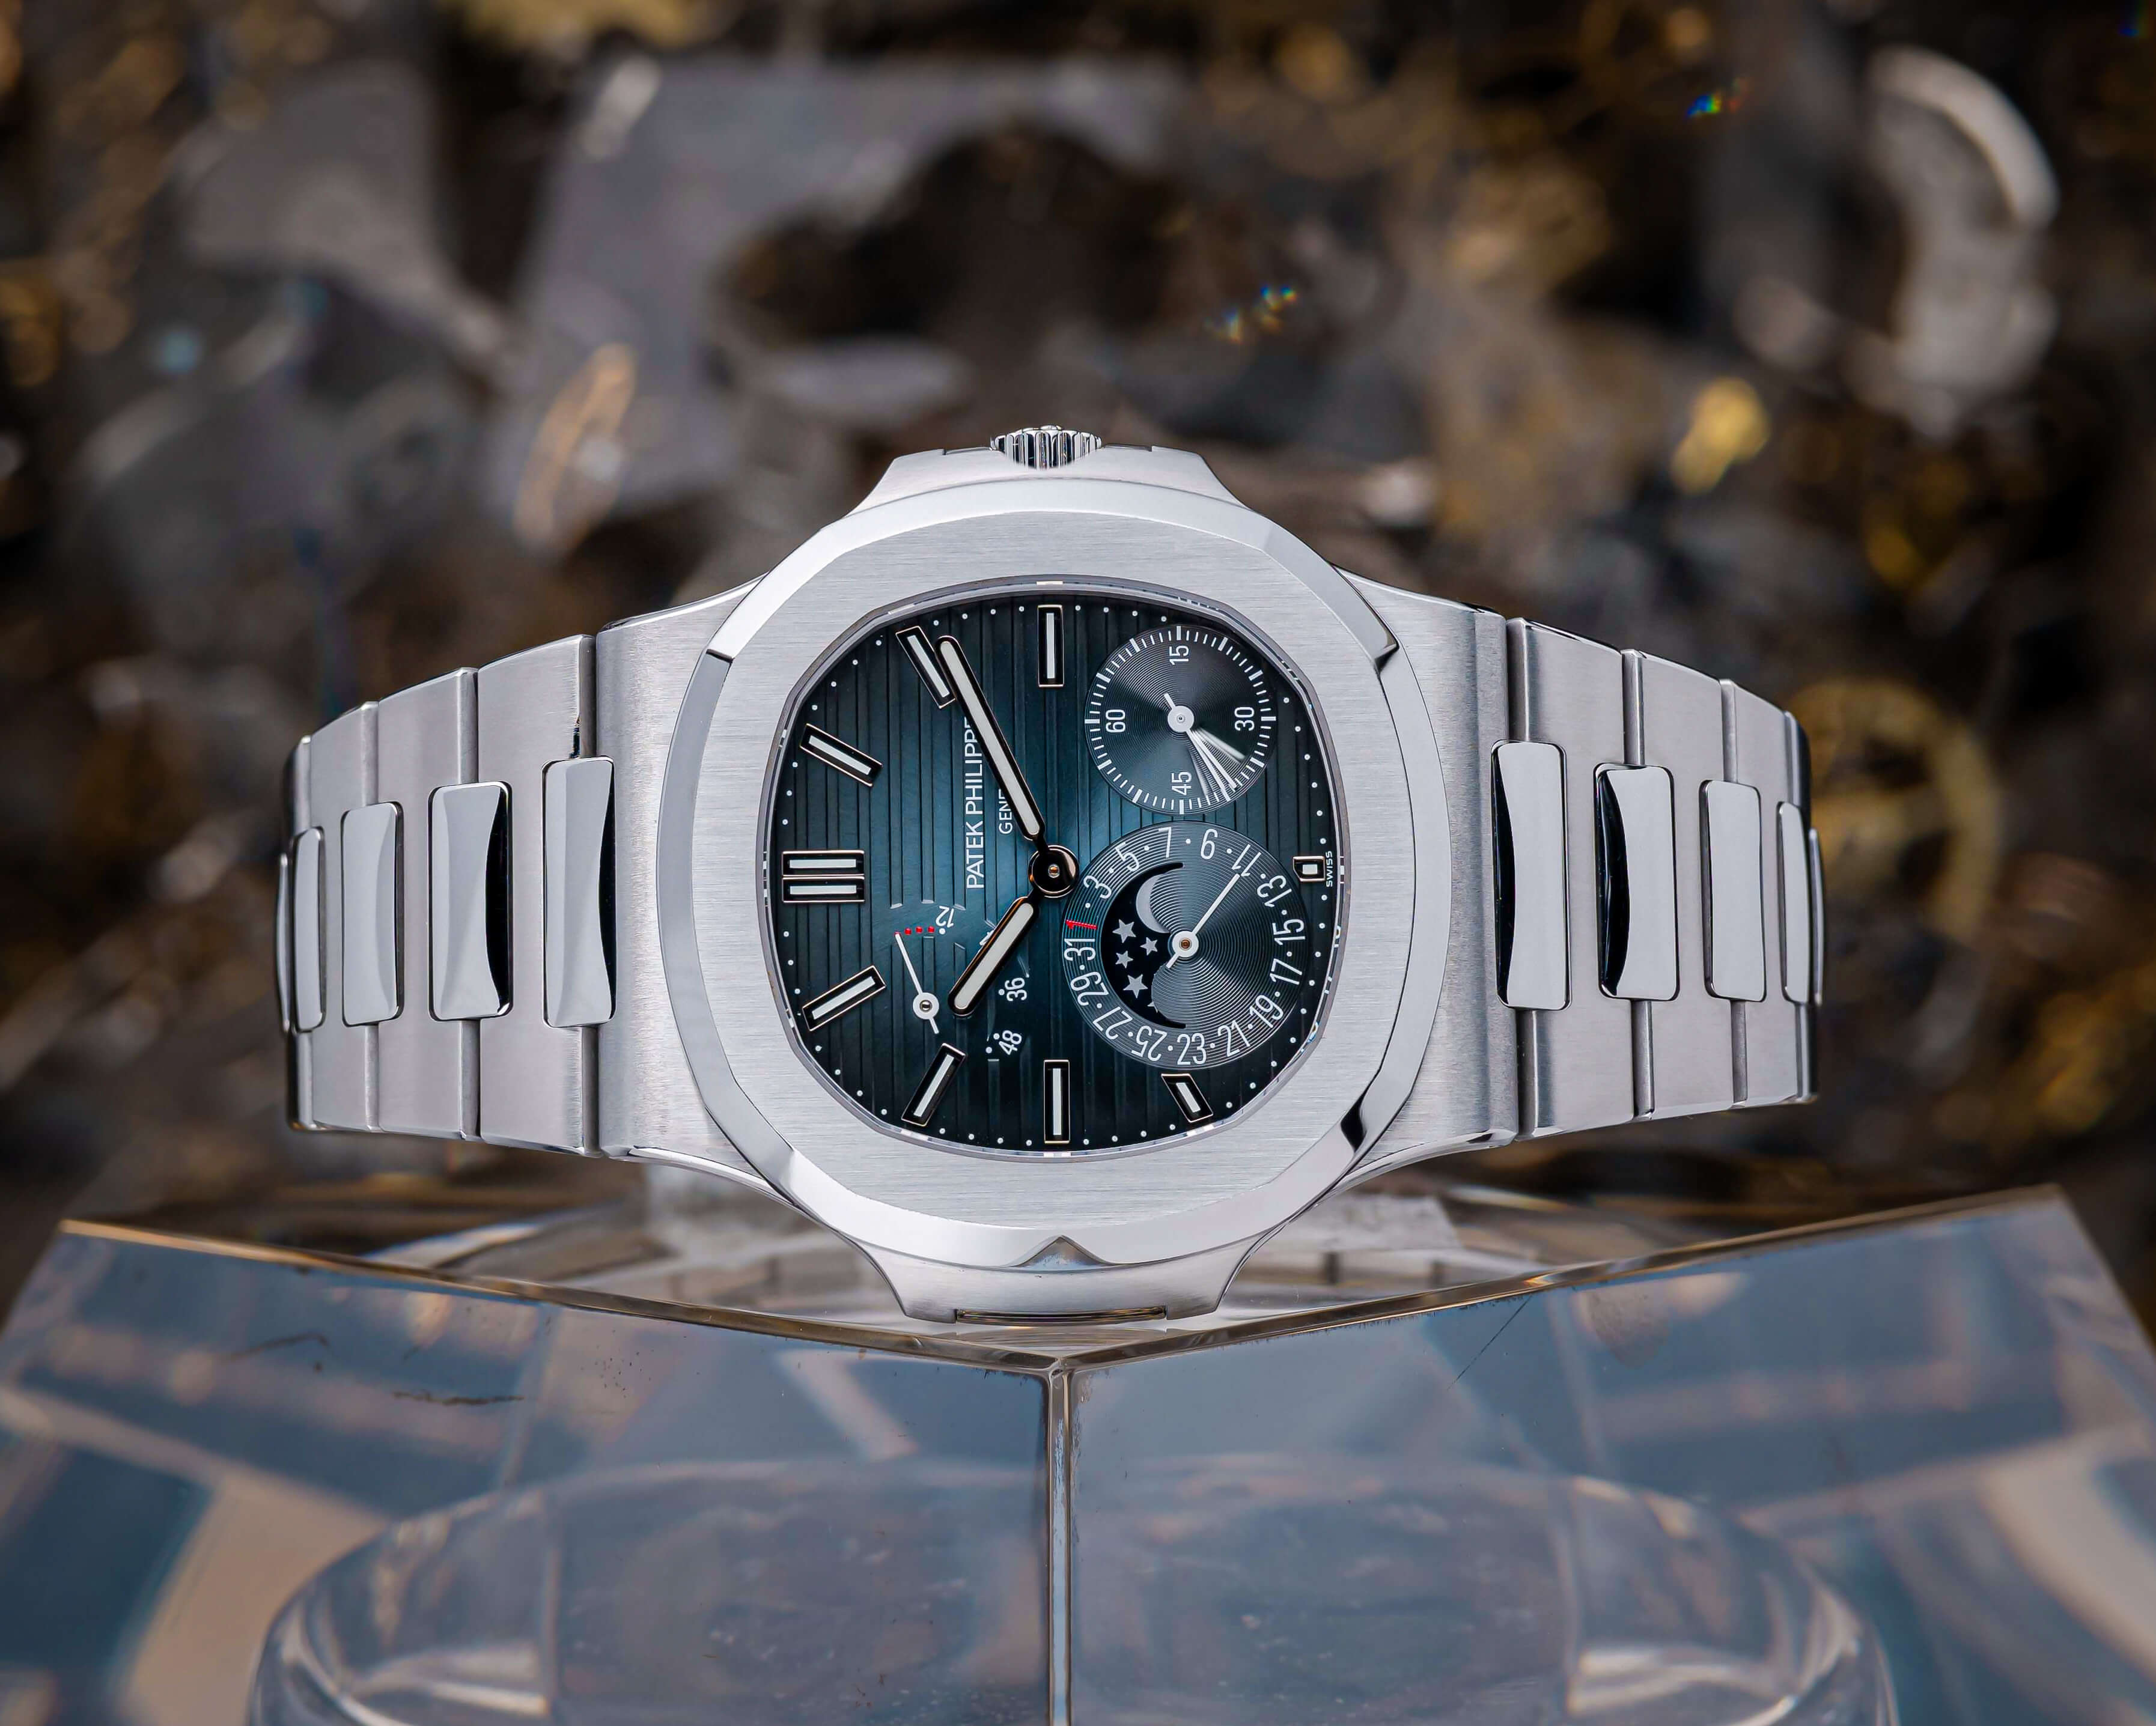 Patek Philippe Nautilus with Blue Index Dial, 40 mm Case Size, and Moonphase Function.